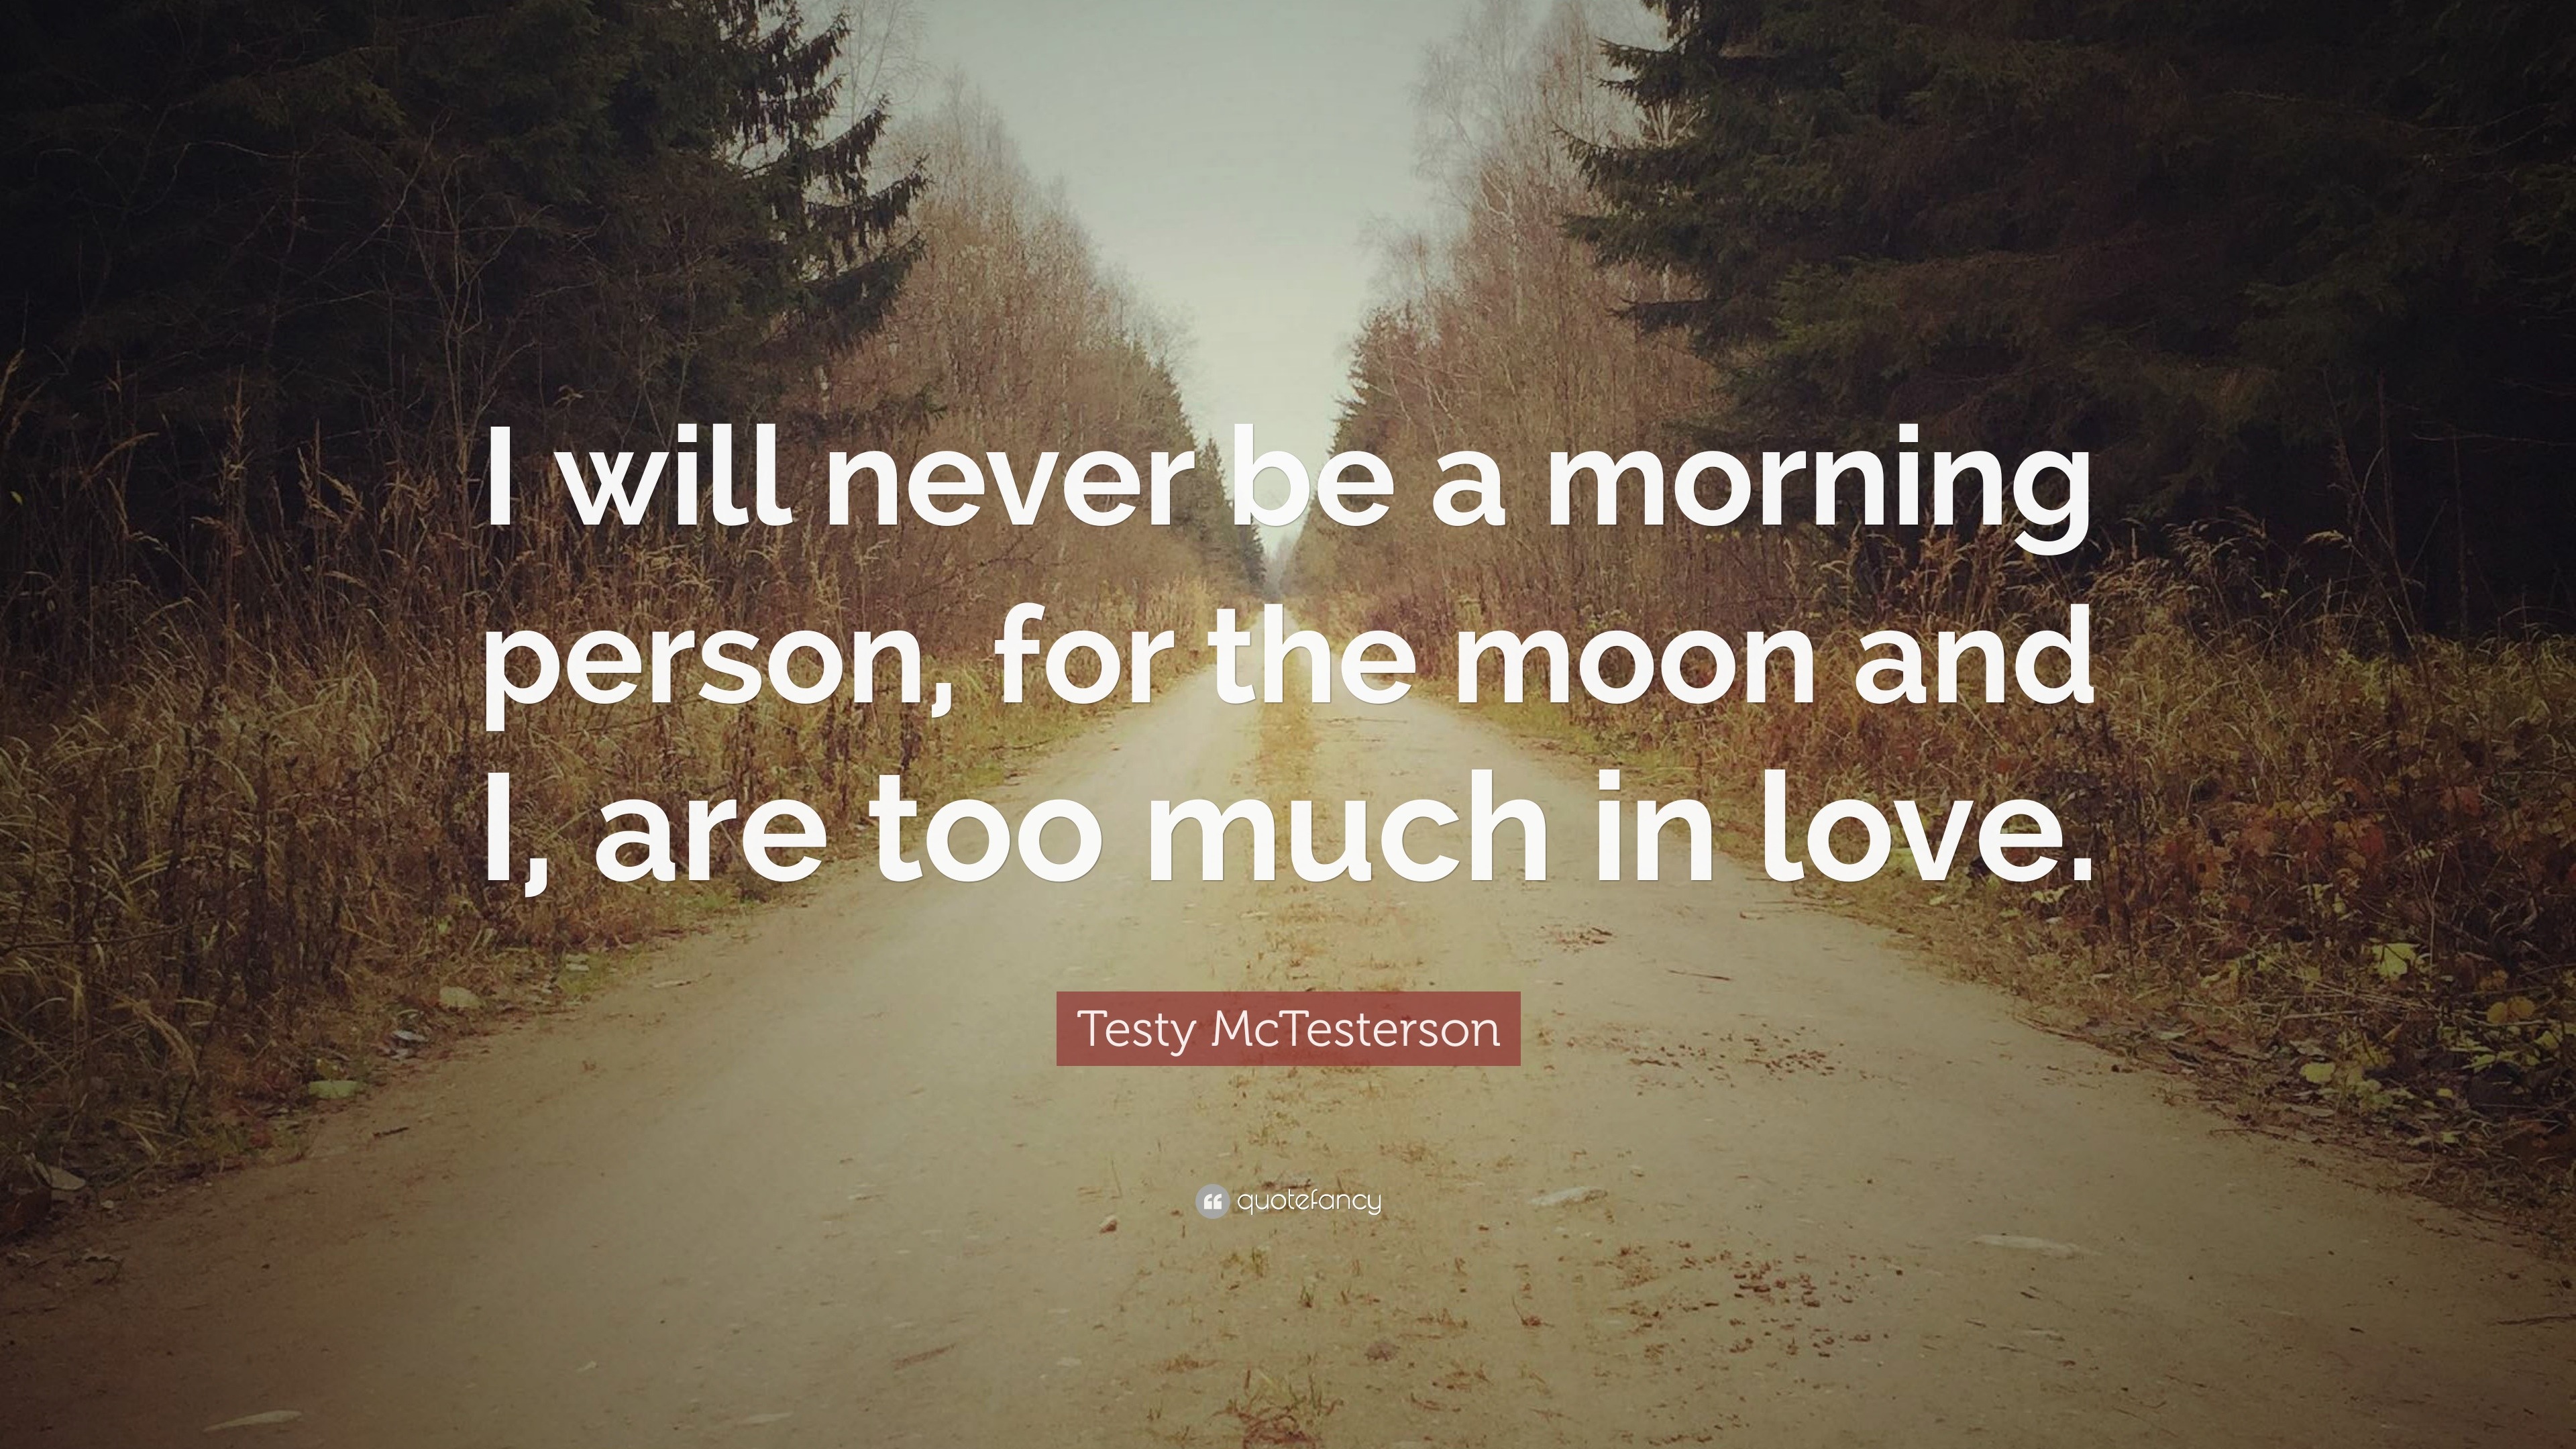 Testy McTesterson Quote “I will never be a morning person for the moon